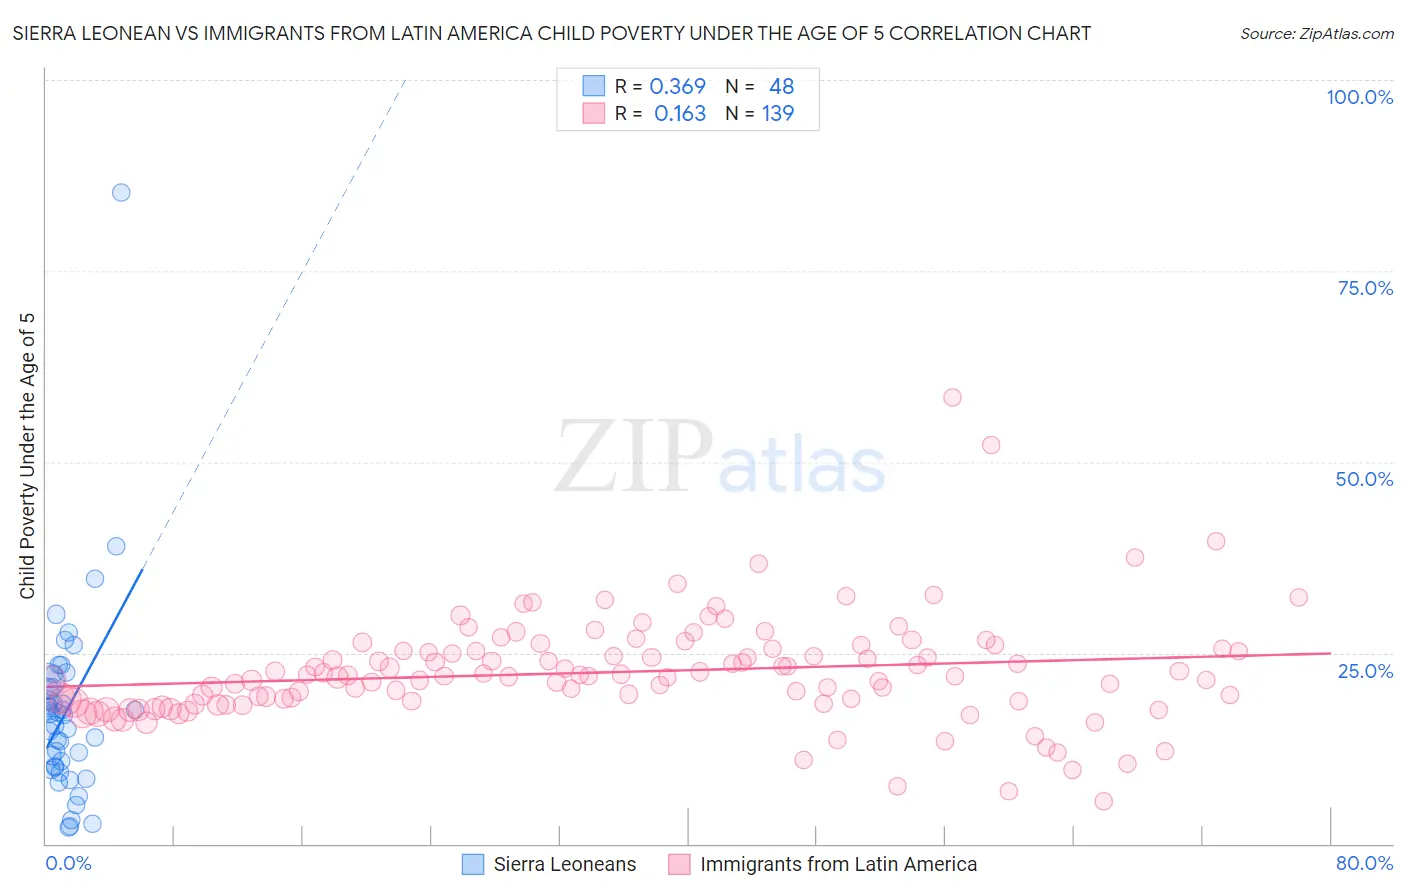 Sierra Leonean vs Immigrants from Latin America Child Poverty Under the Age of 5